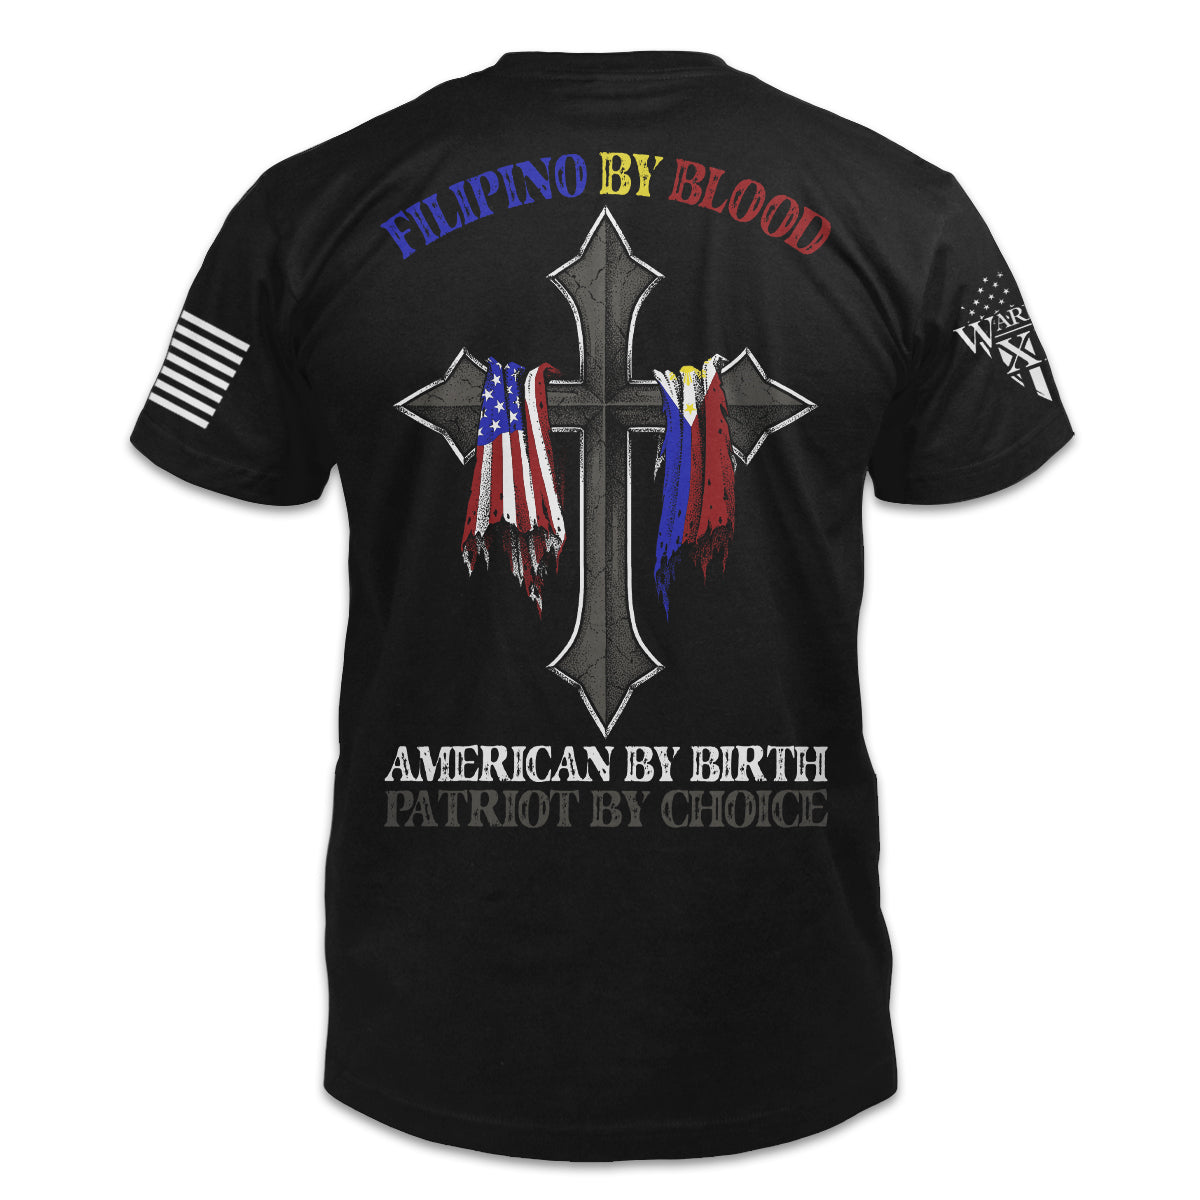 A black t-shirt with the words "Filipino by blood, American by birth, patriot by choice" with a cross holding the US & Filipino flag printed on the back of the shirt.